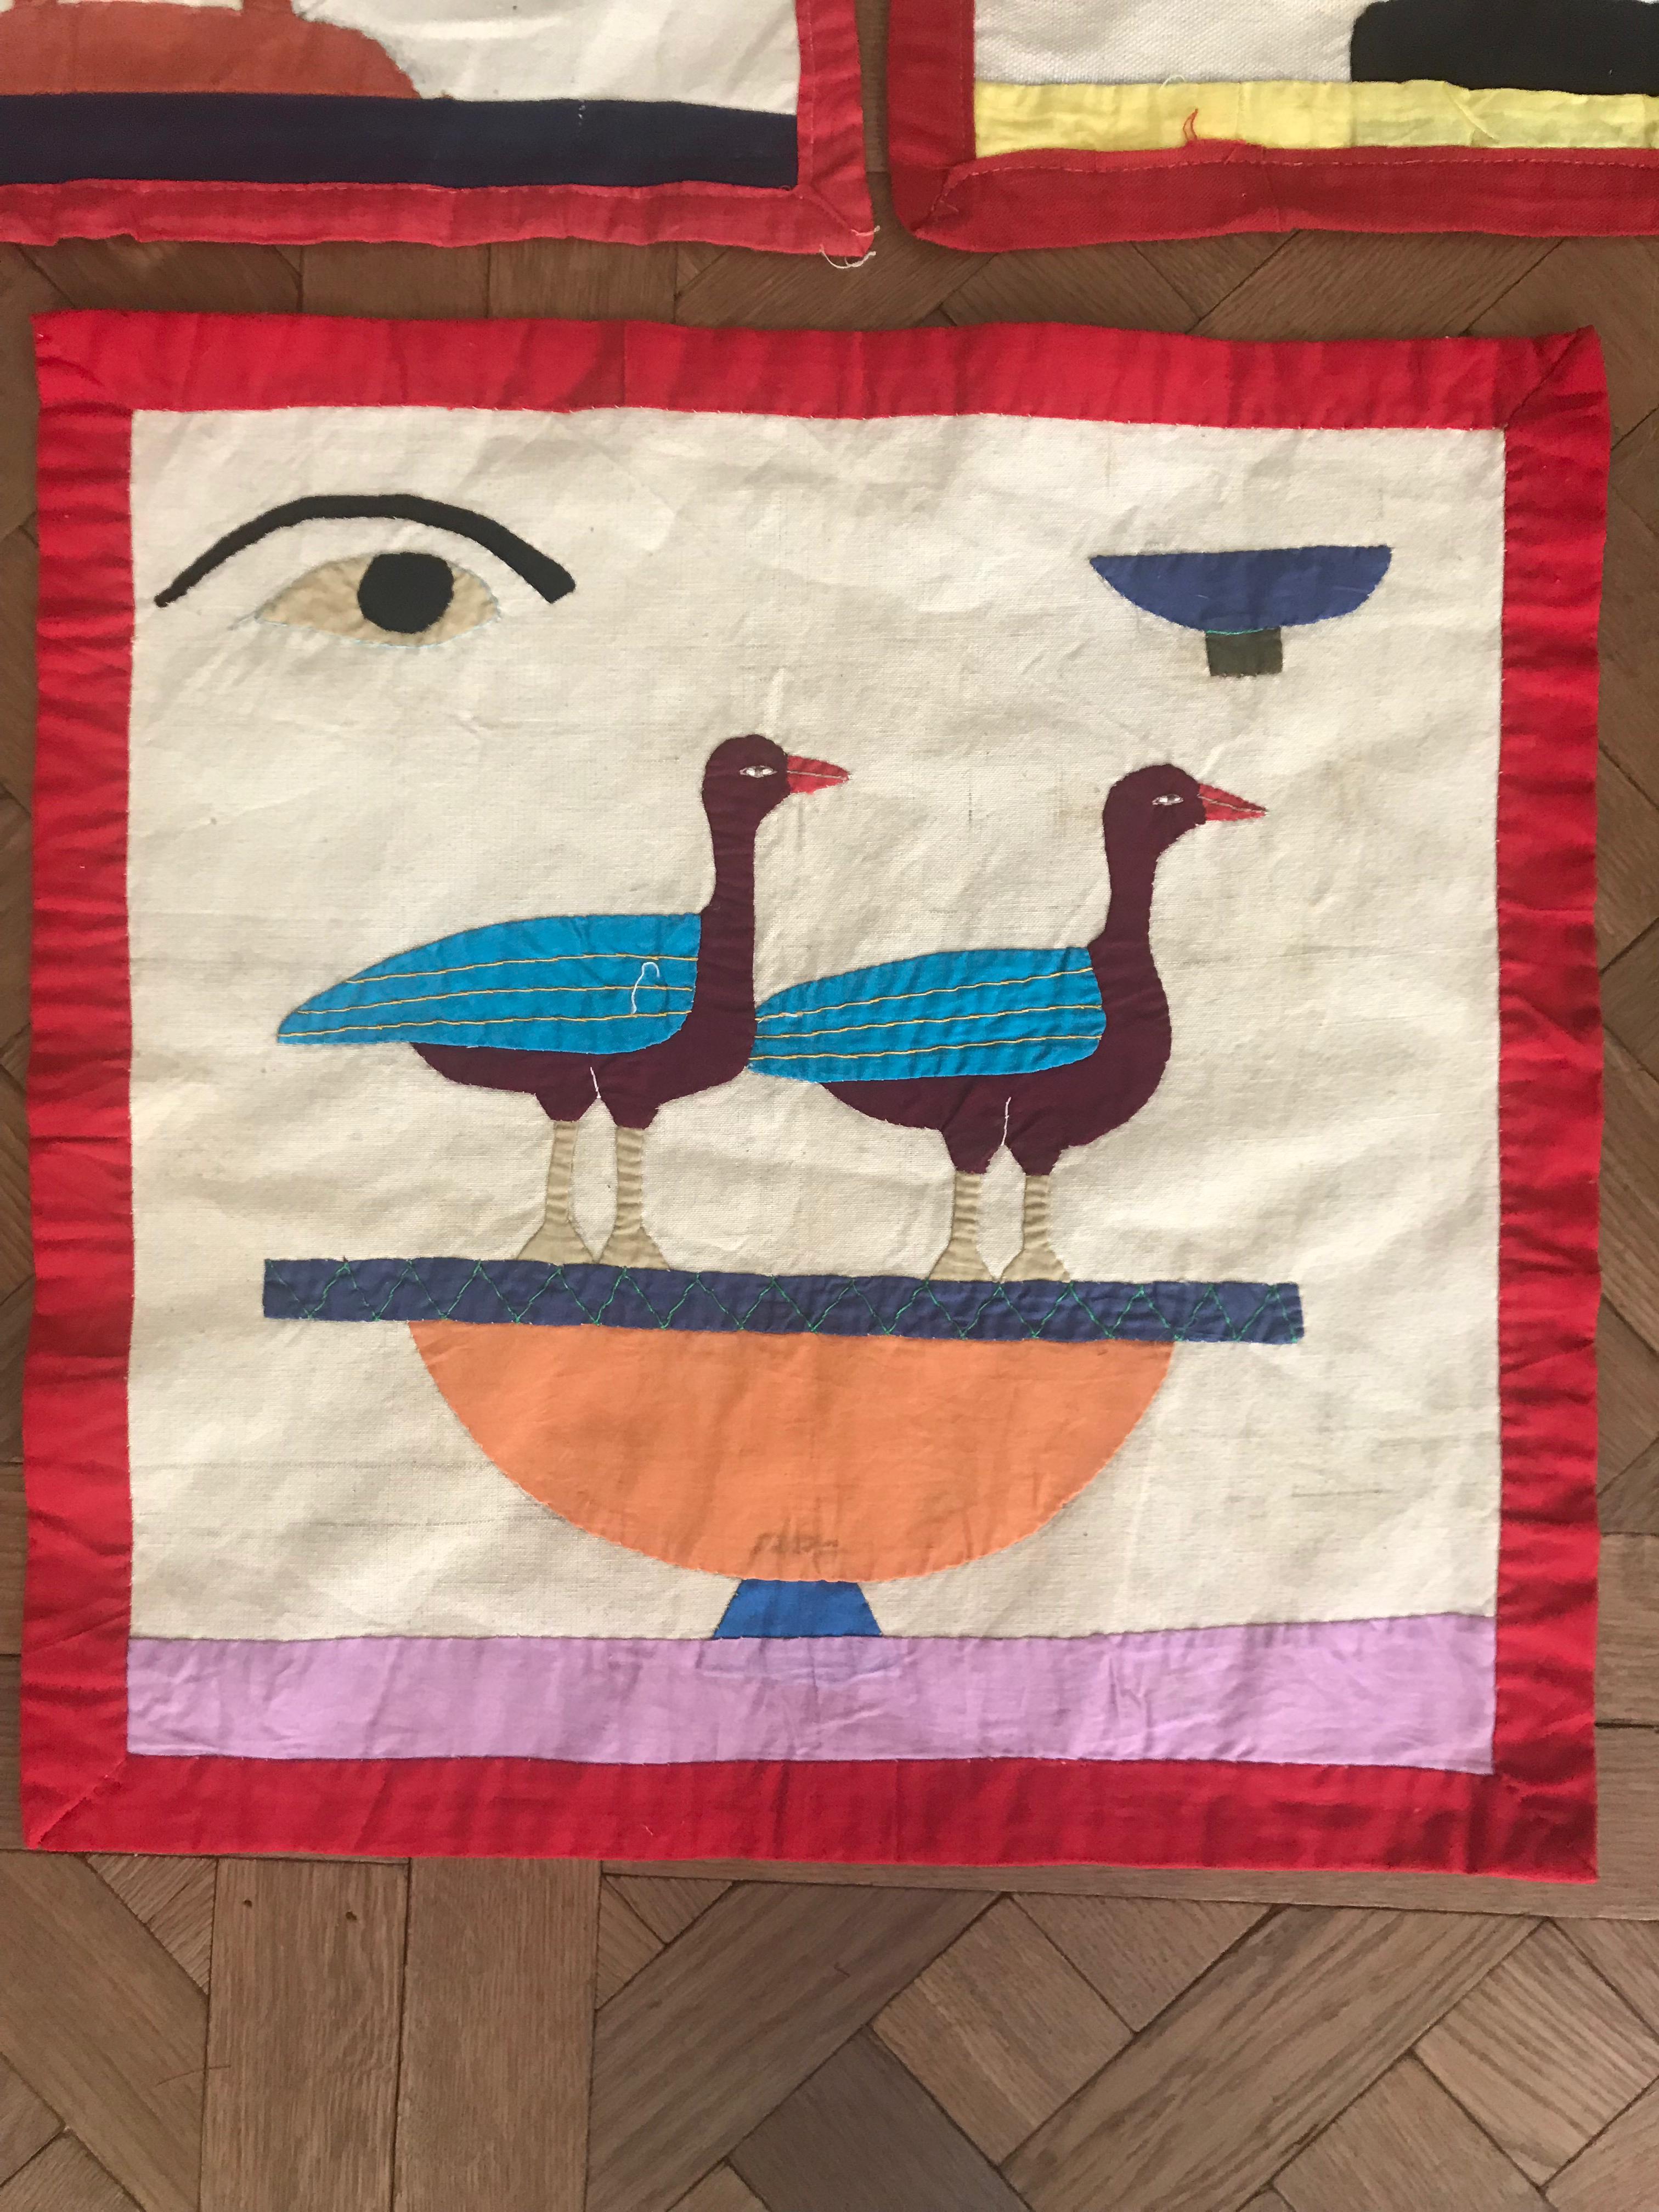 Six vintage Egyptian textile panels. Each panel is hand sewn with colorful cotton appliquéd on a cotton ground. They could be sewn together to make a wall hanging or used separately to make pillows, or hung individually with or without frames on the